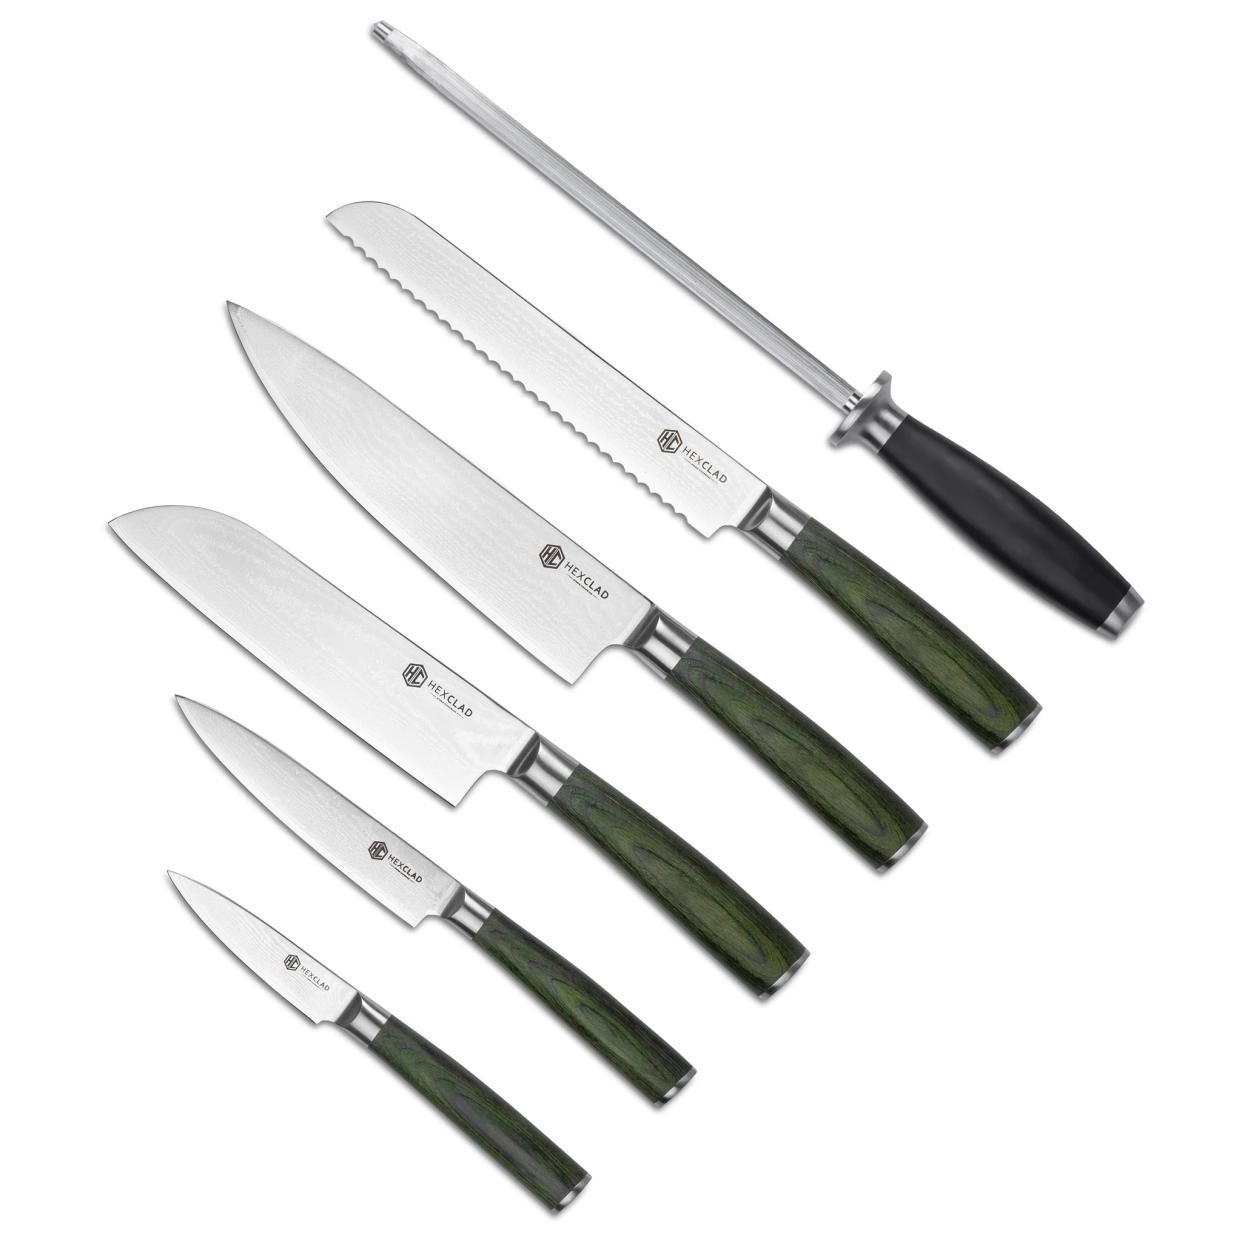 HexClad Essential Japanese Damascus Steel Knives, 6-Piece Set